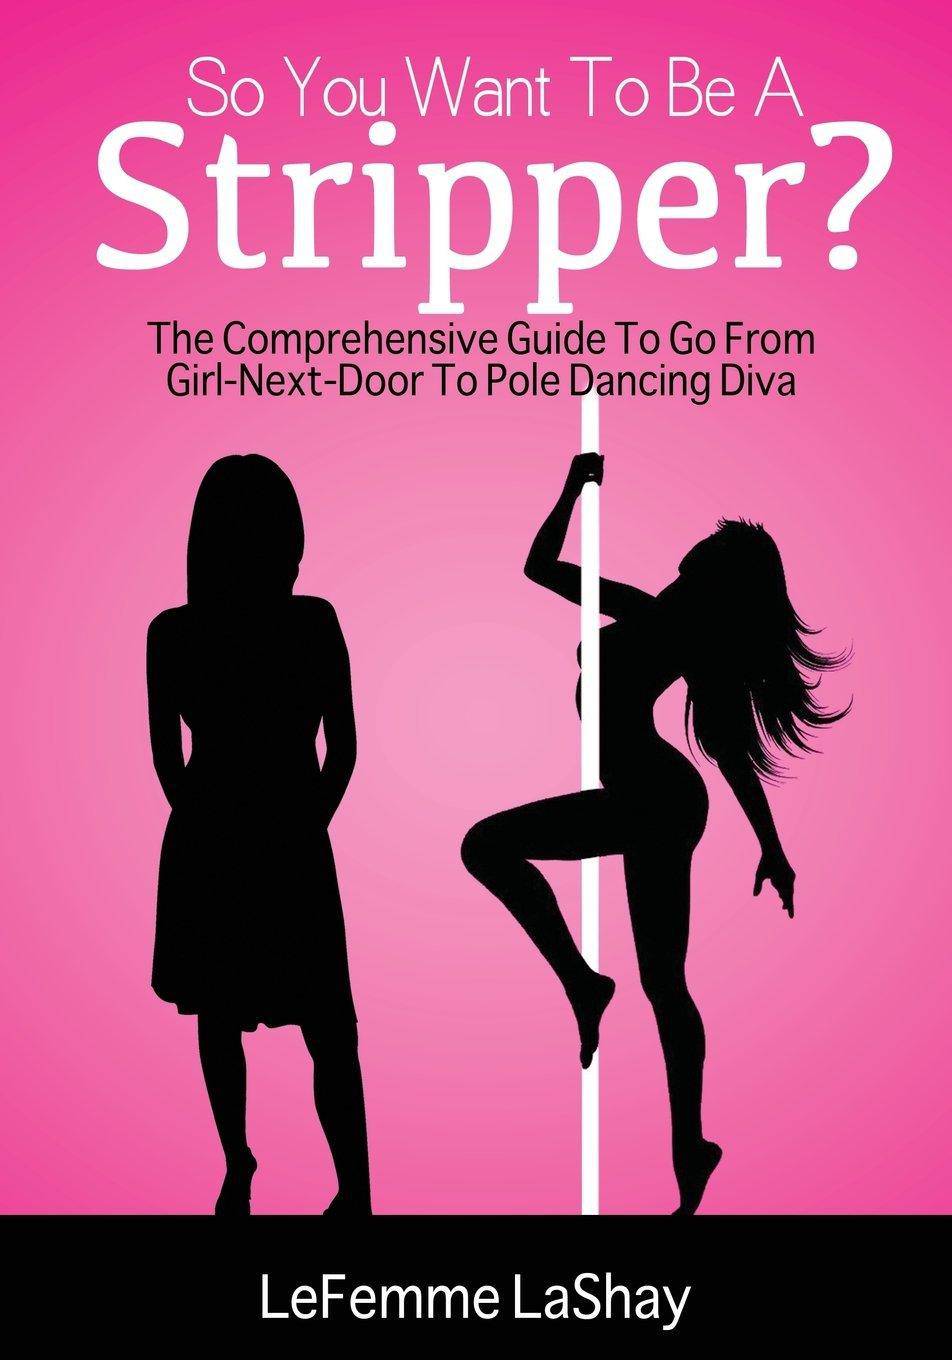 So You Want To Be A Stripper? - SureShot Books Publishing LLC